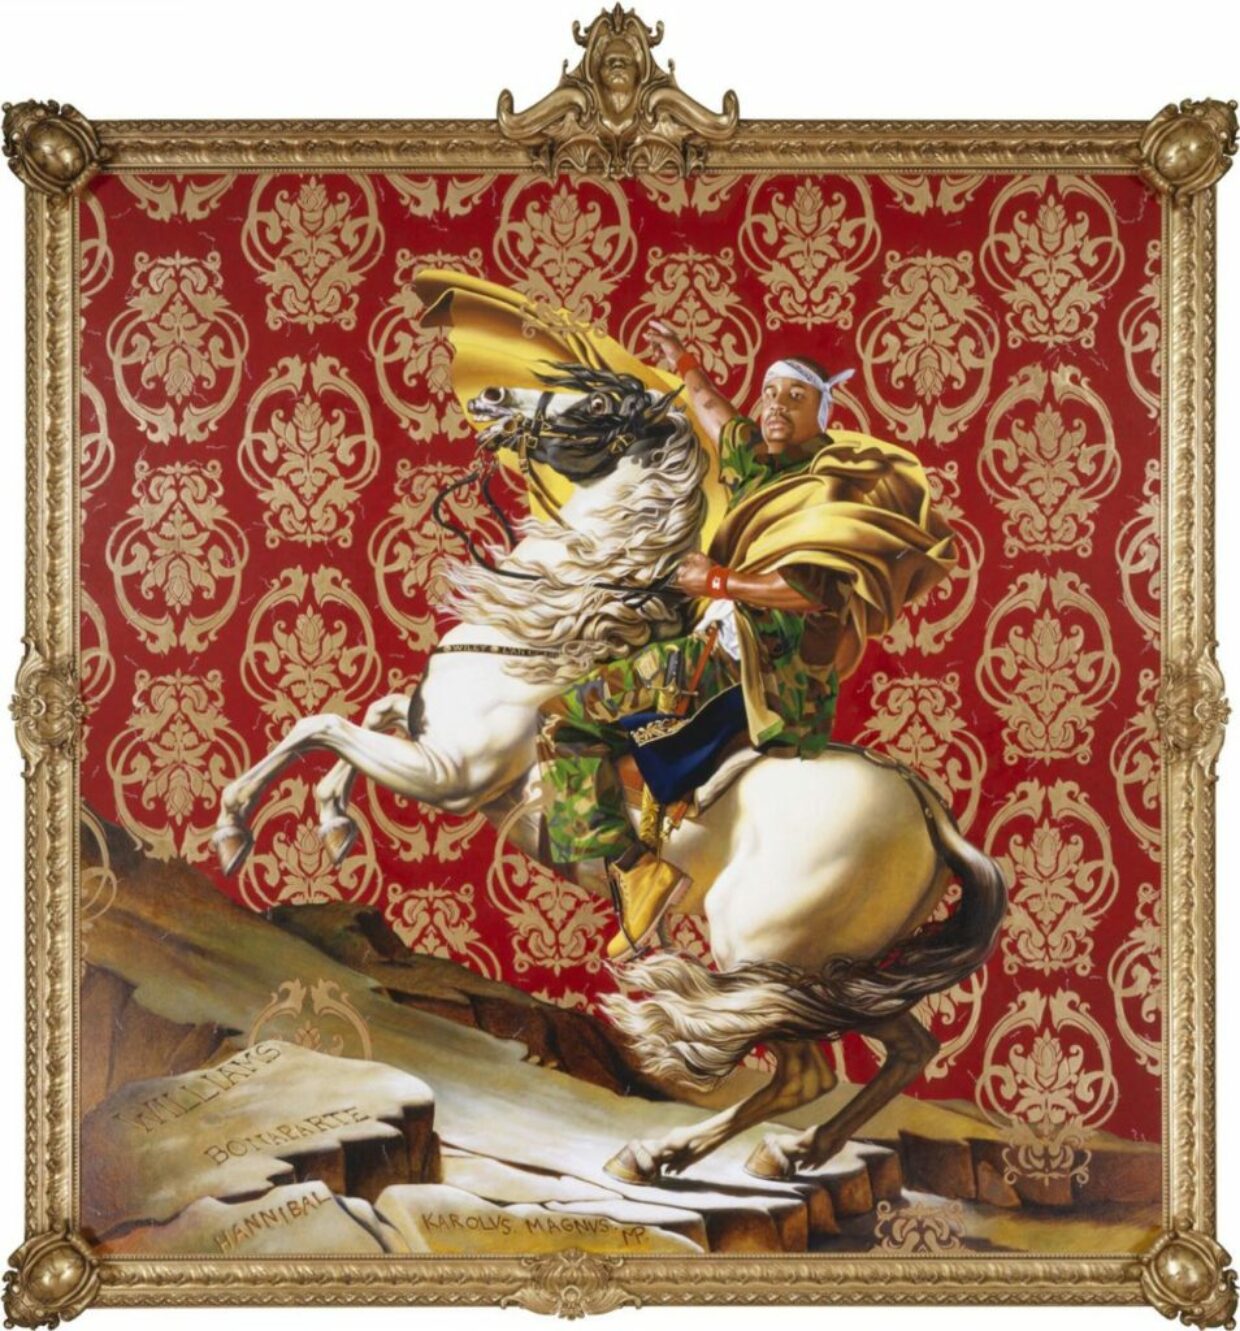 Kehinde Wiley Installing Monumental Statue in Times Square | 2